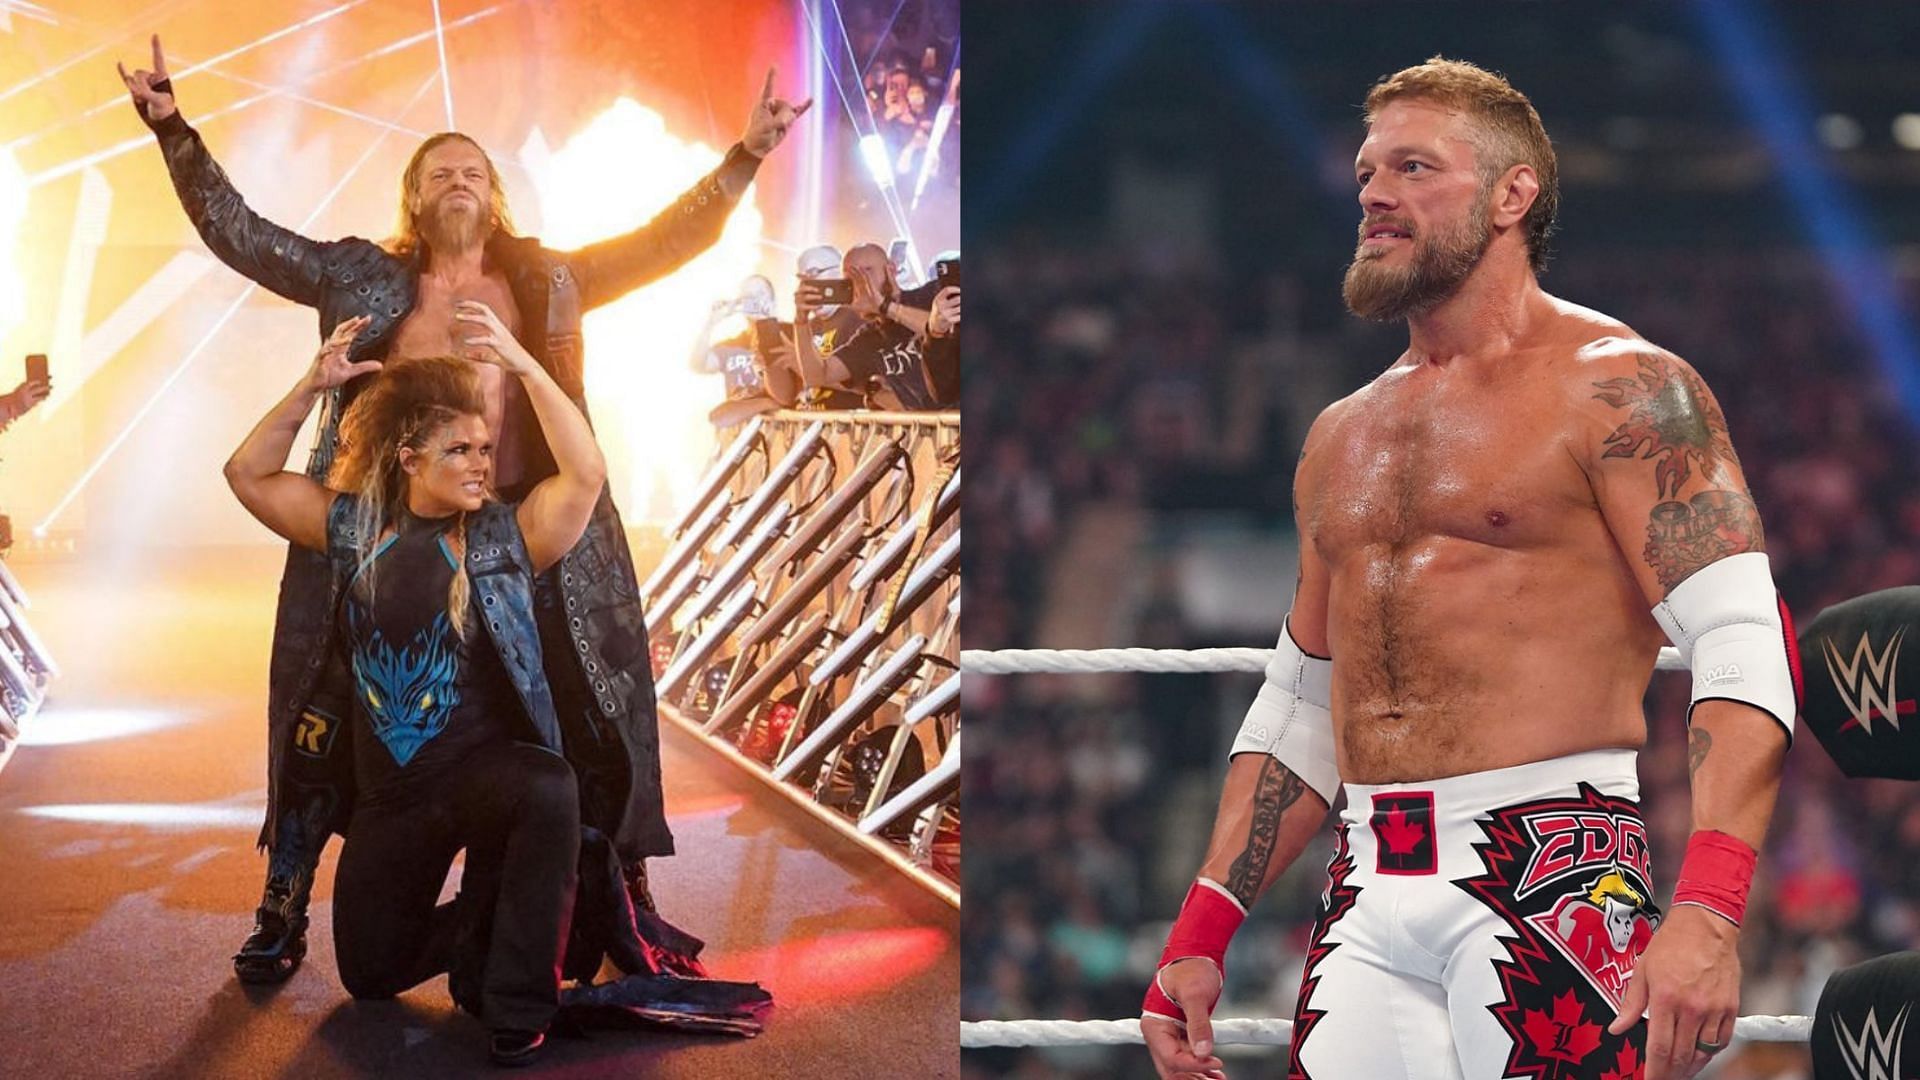 Edge will be in action at WrestleMania 39